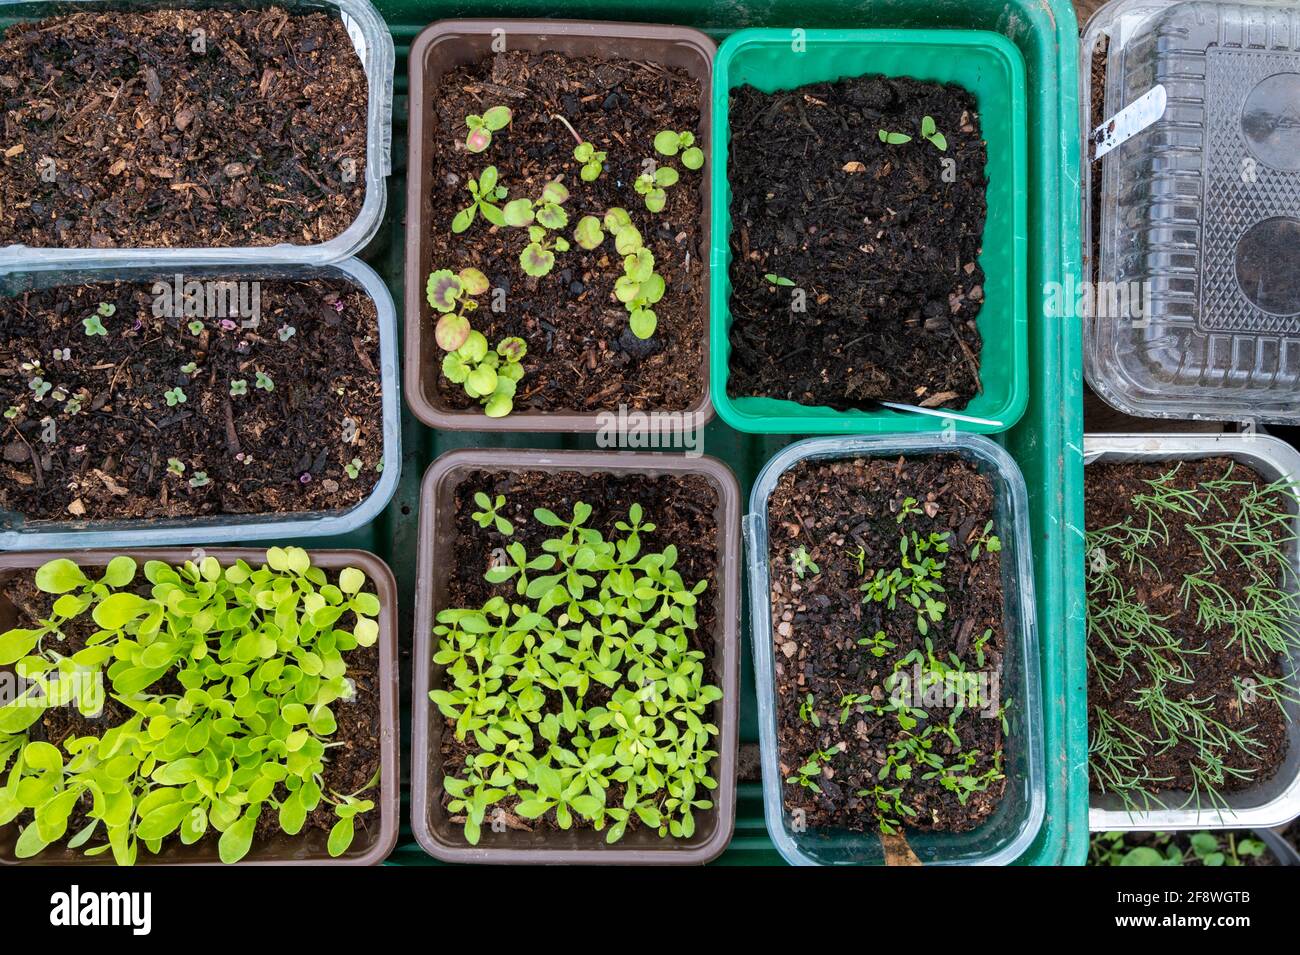 A variety of plastic food containers re-cycled to germinate vegetable and flower seedlings. Stock Photo